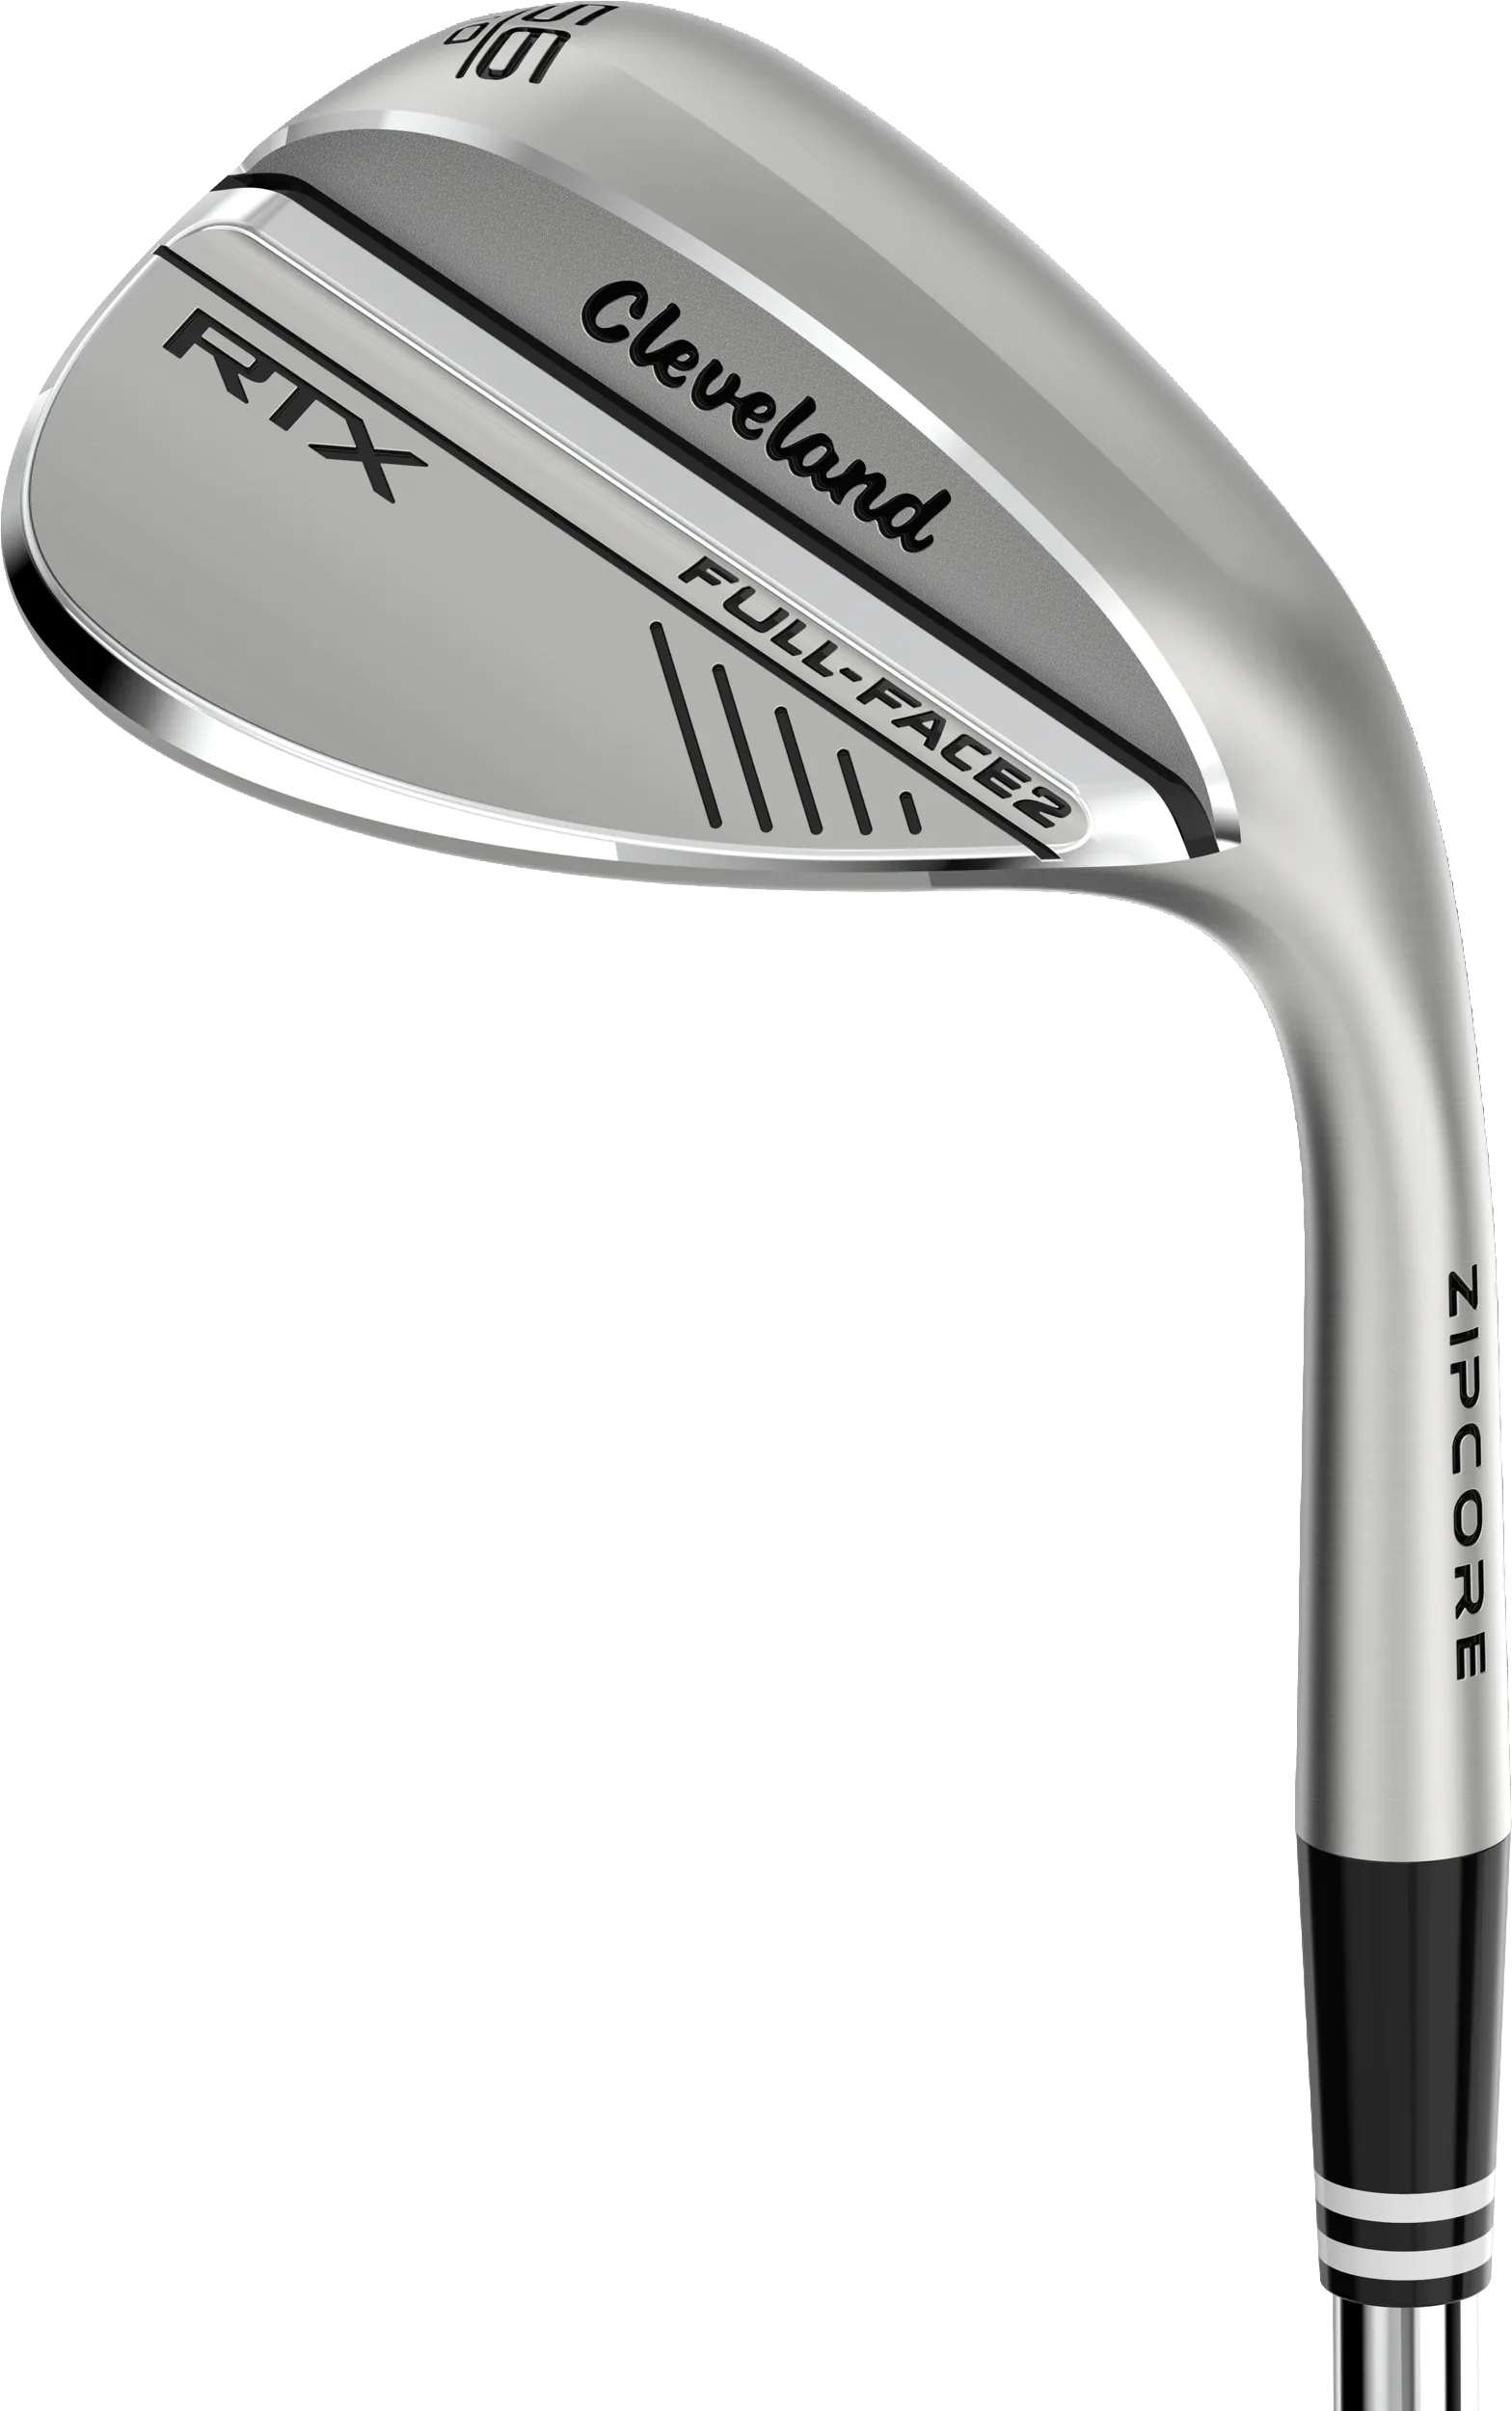 Cleveland RTX Full-Face 2 Tour Satin Wedge